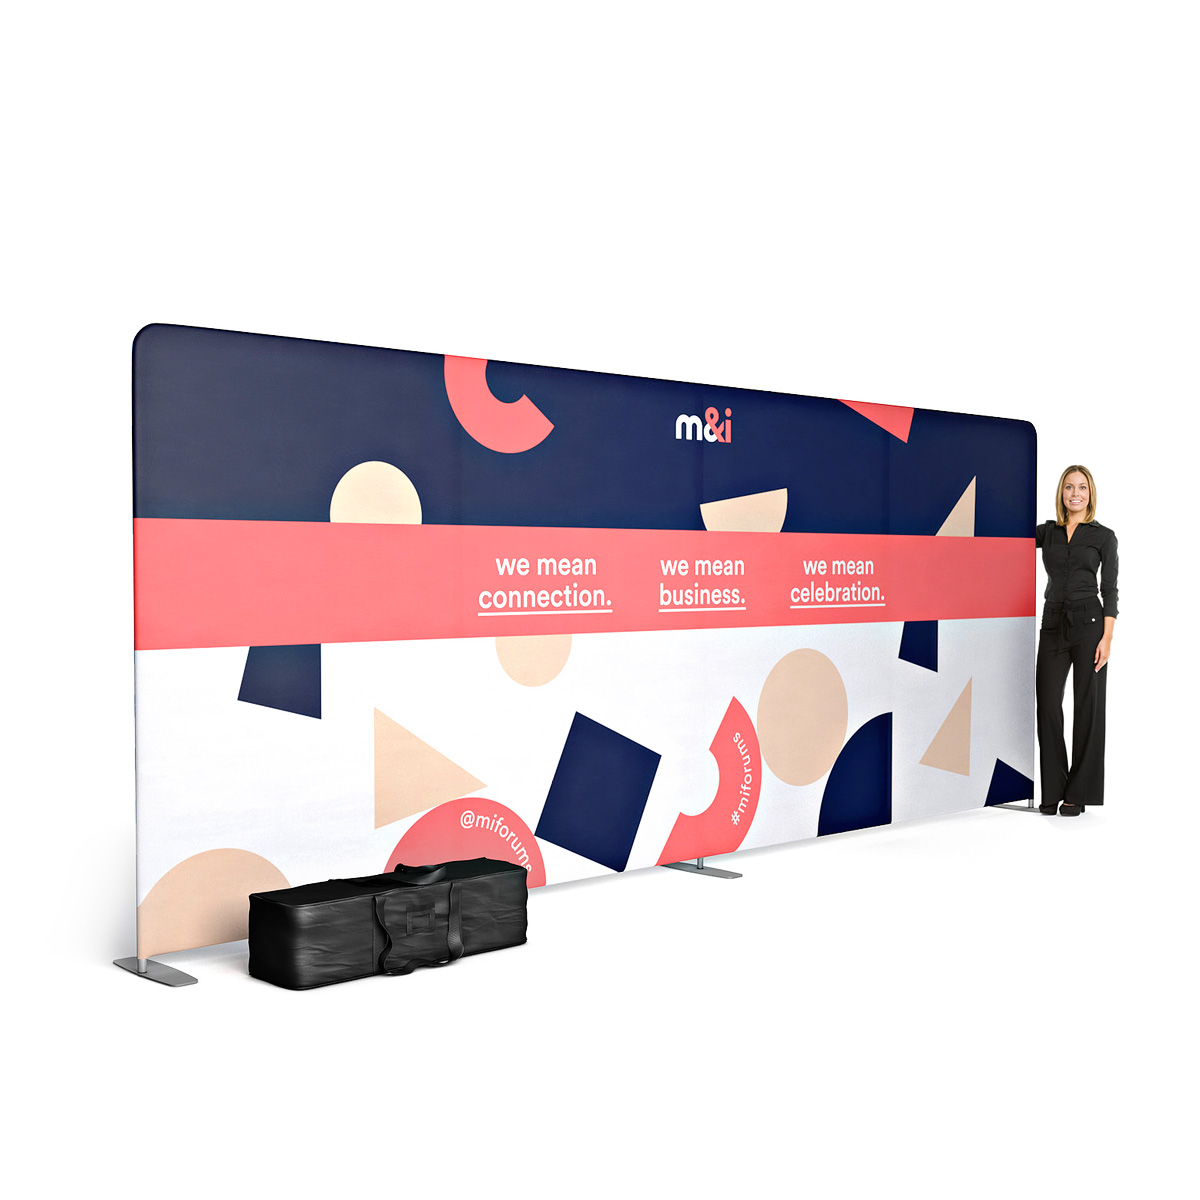 FABRIWALL® Stretch Fabric Exhibition Stand Display 5m x 2m